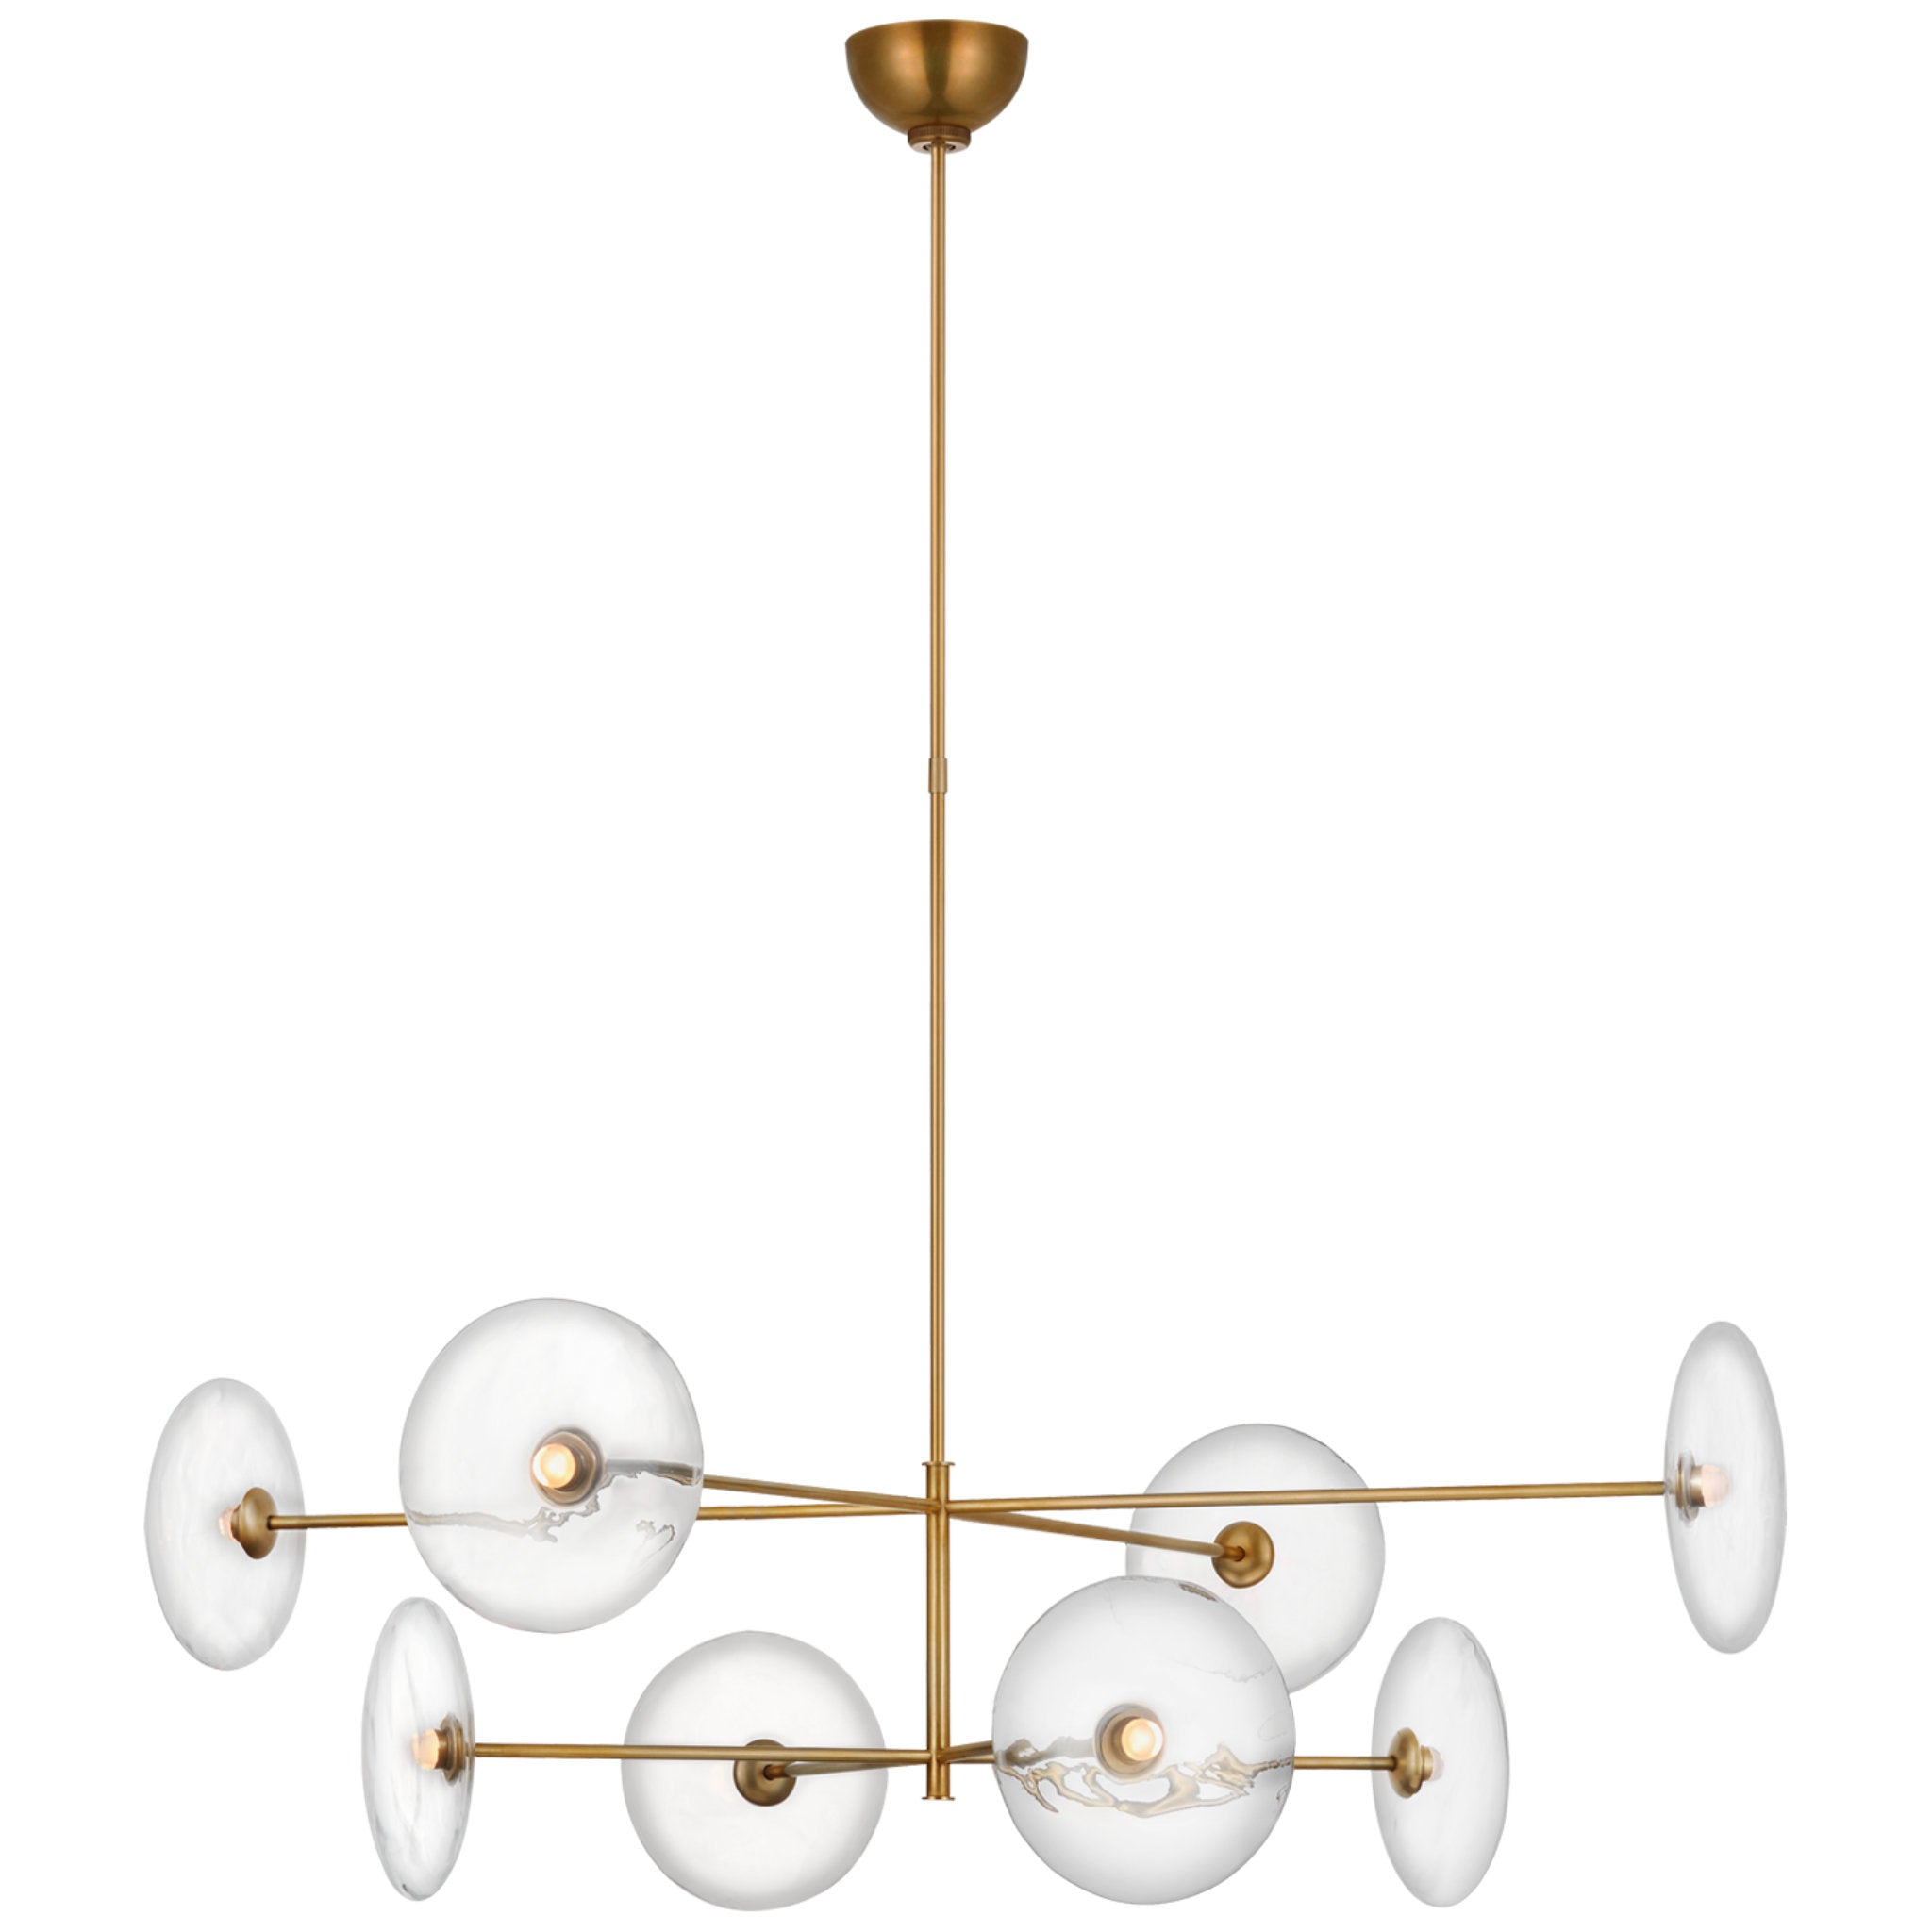 Ian K. Fowler Calvino X-Large Radial Chandelier in Hand-Rubbed Antique Brass with Clear Glass